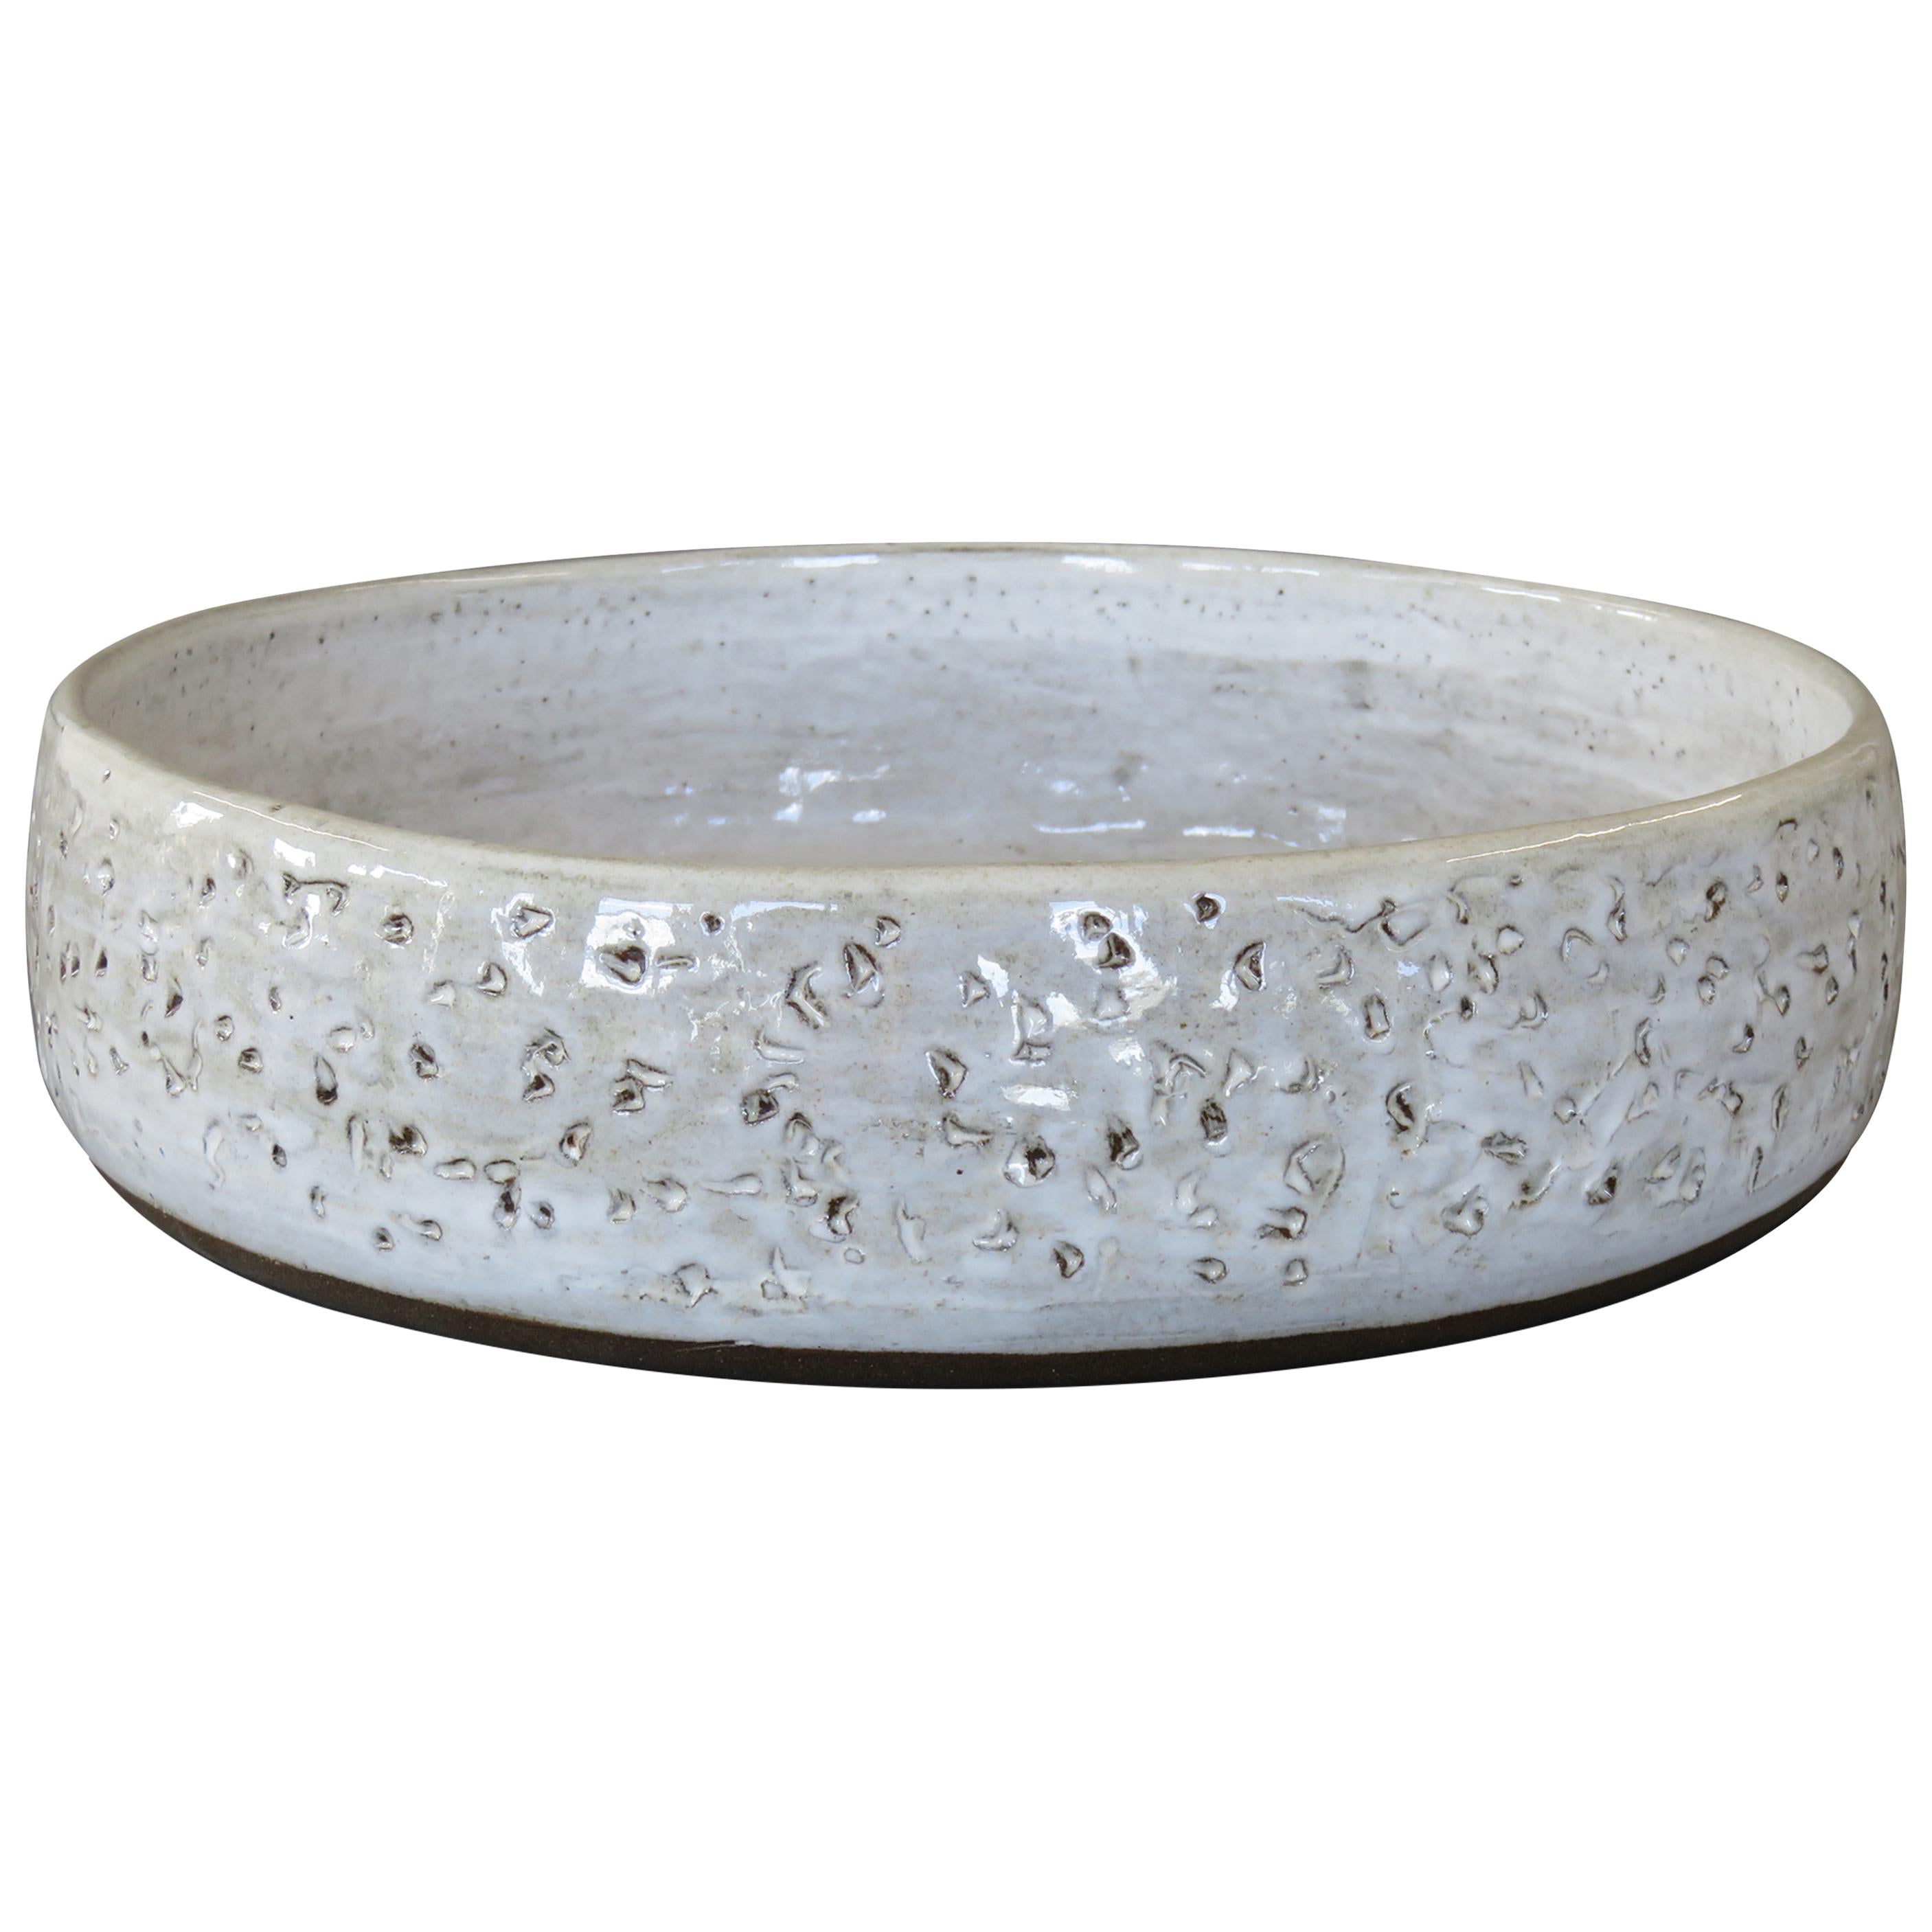 Large Low Serving Bowl, Carved Exterior with White Glaze, Hand Built Ceramic